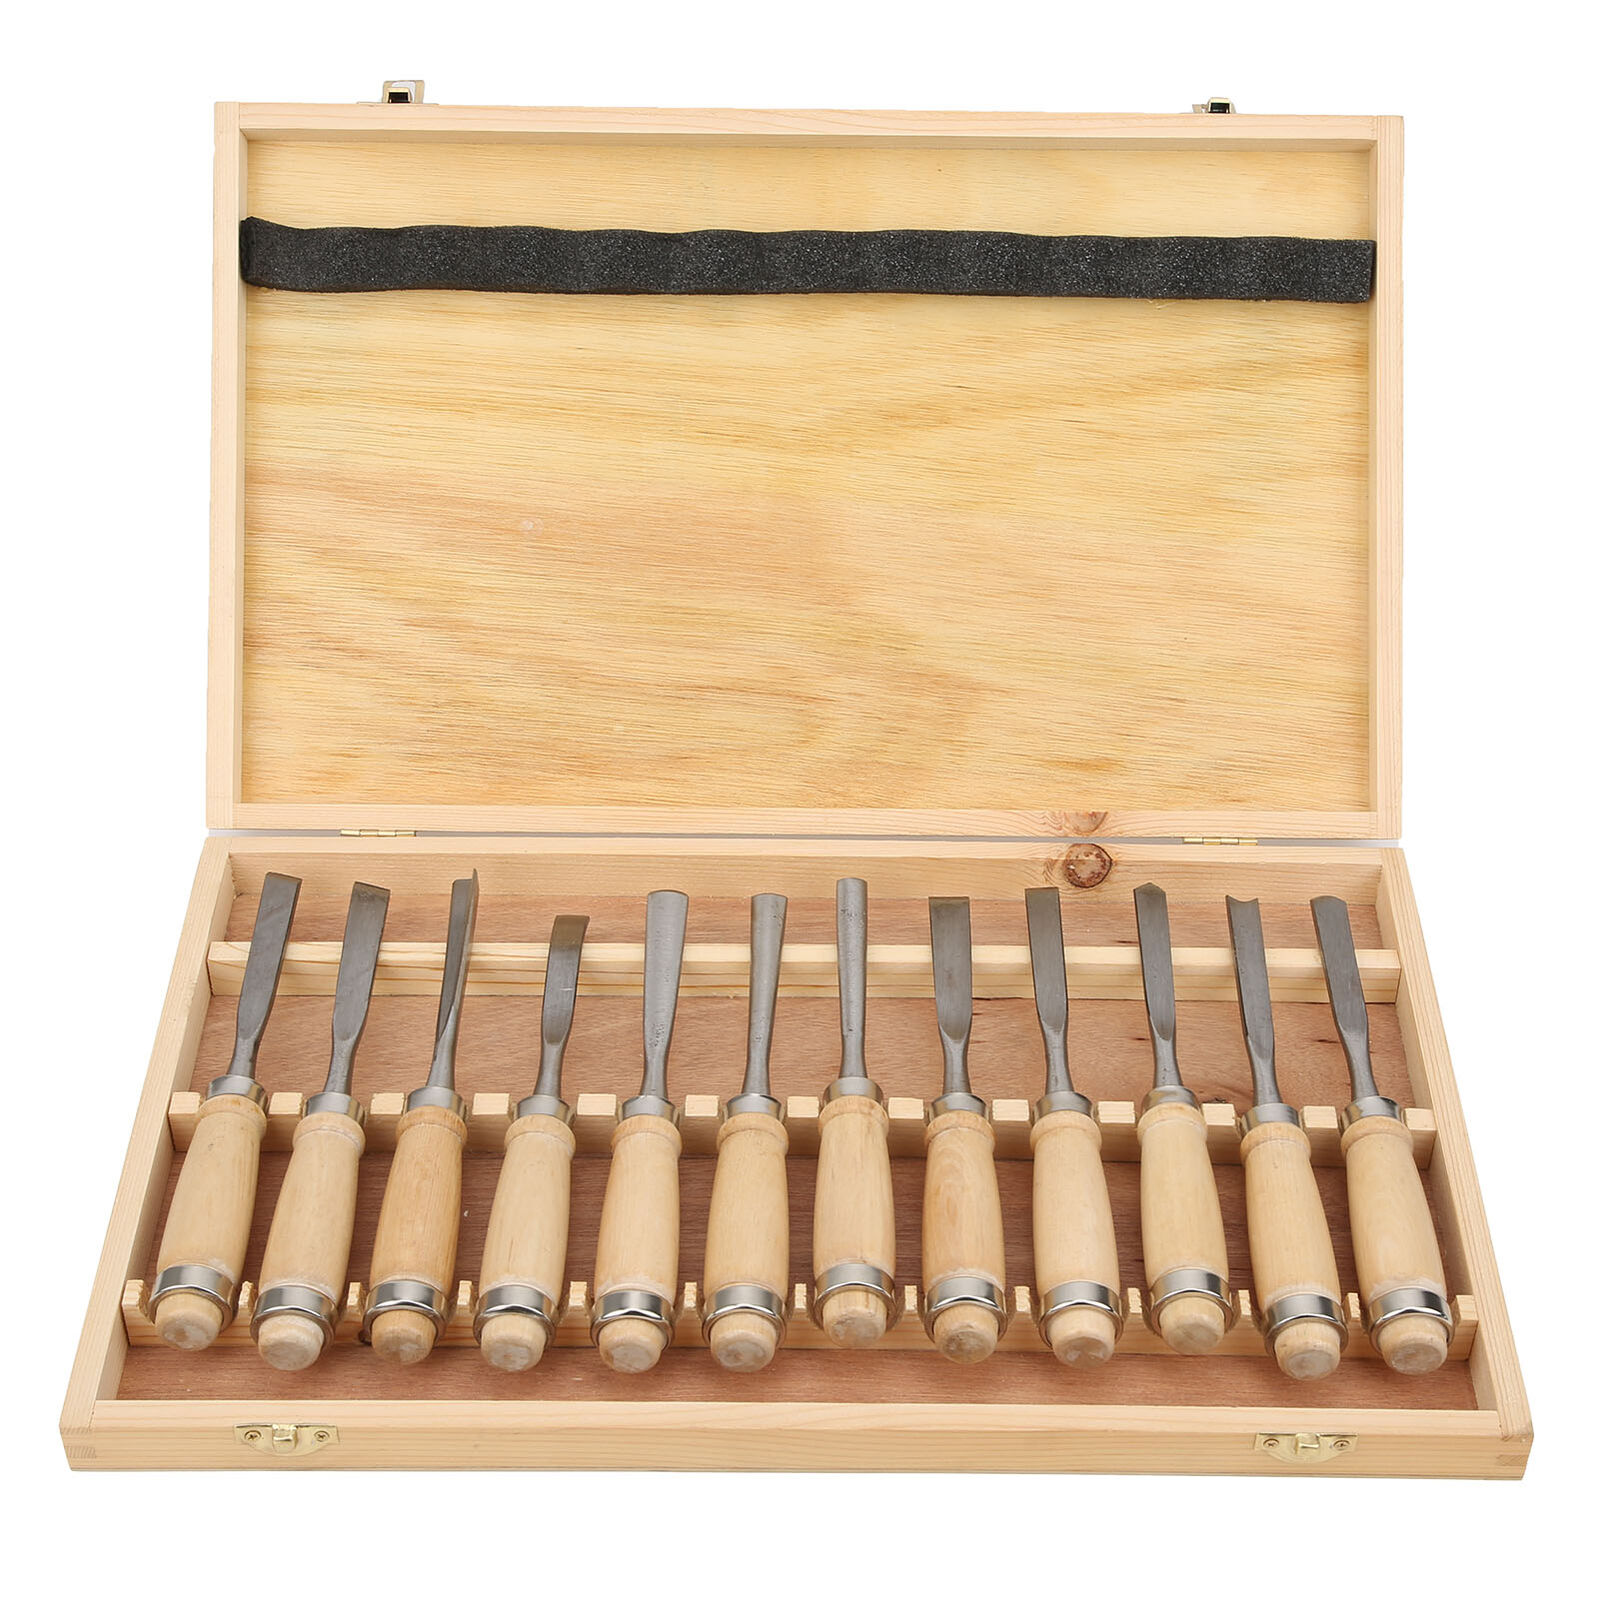 12pcs Wood Engraving Knives Set Sculpture Crafting Tools Woodworking Chisel US